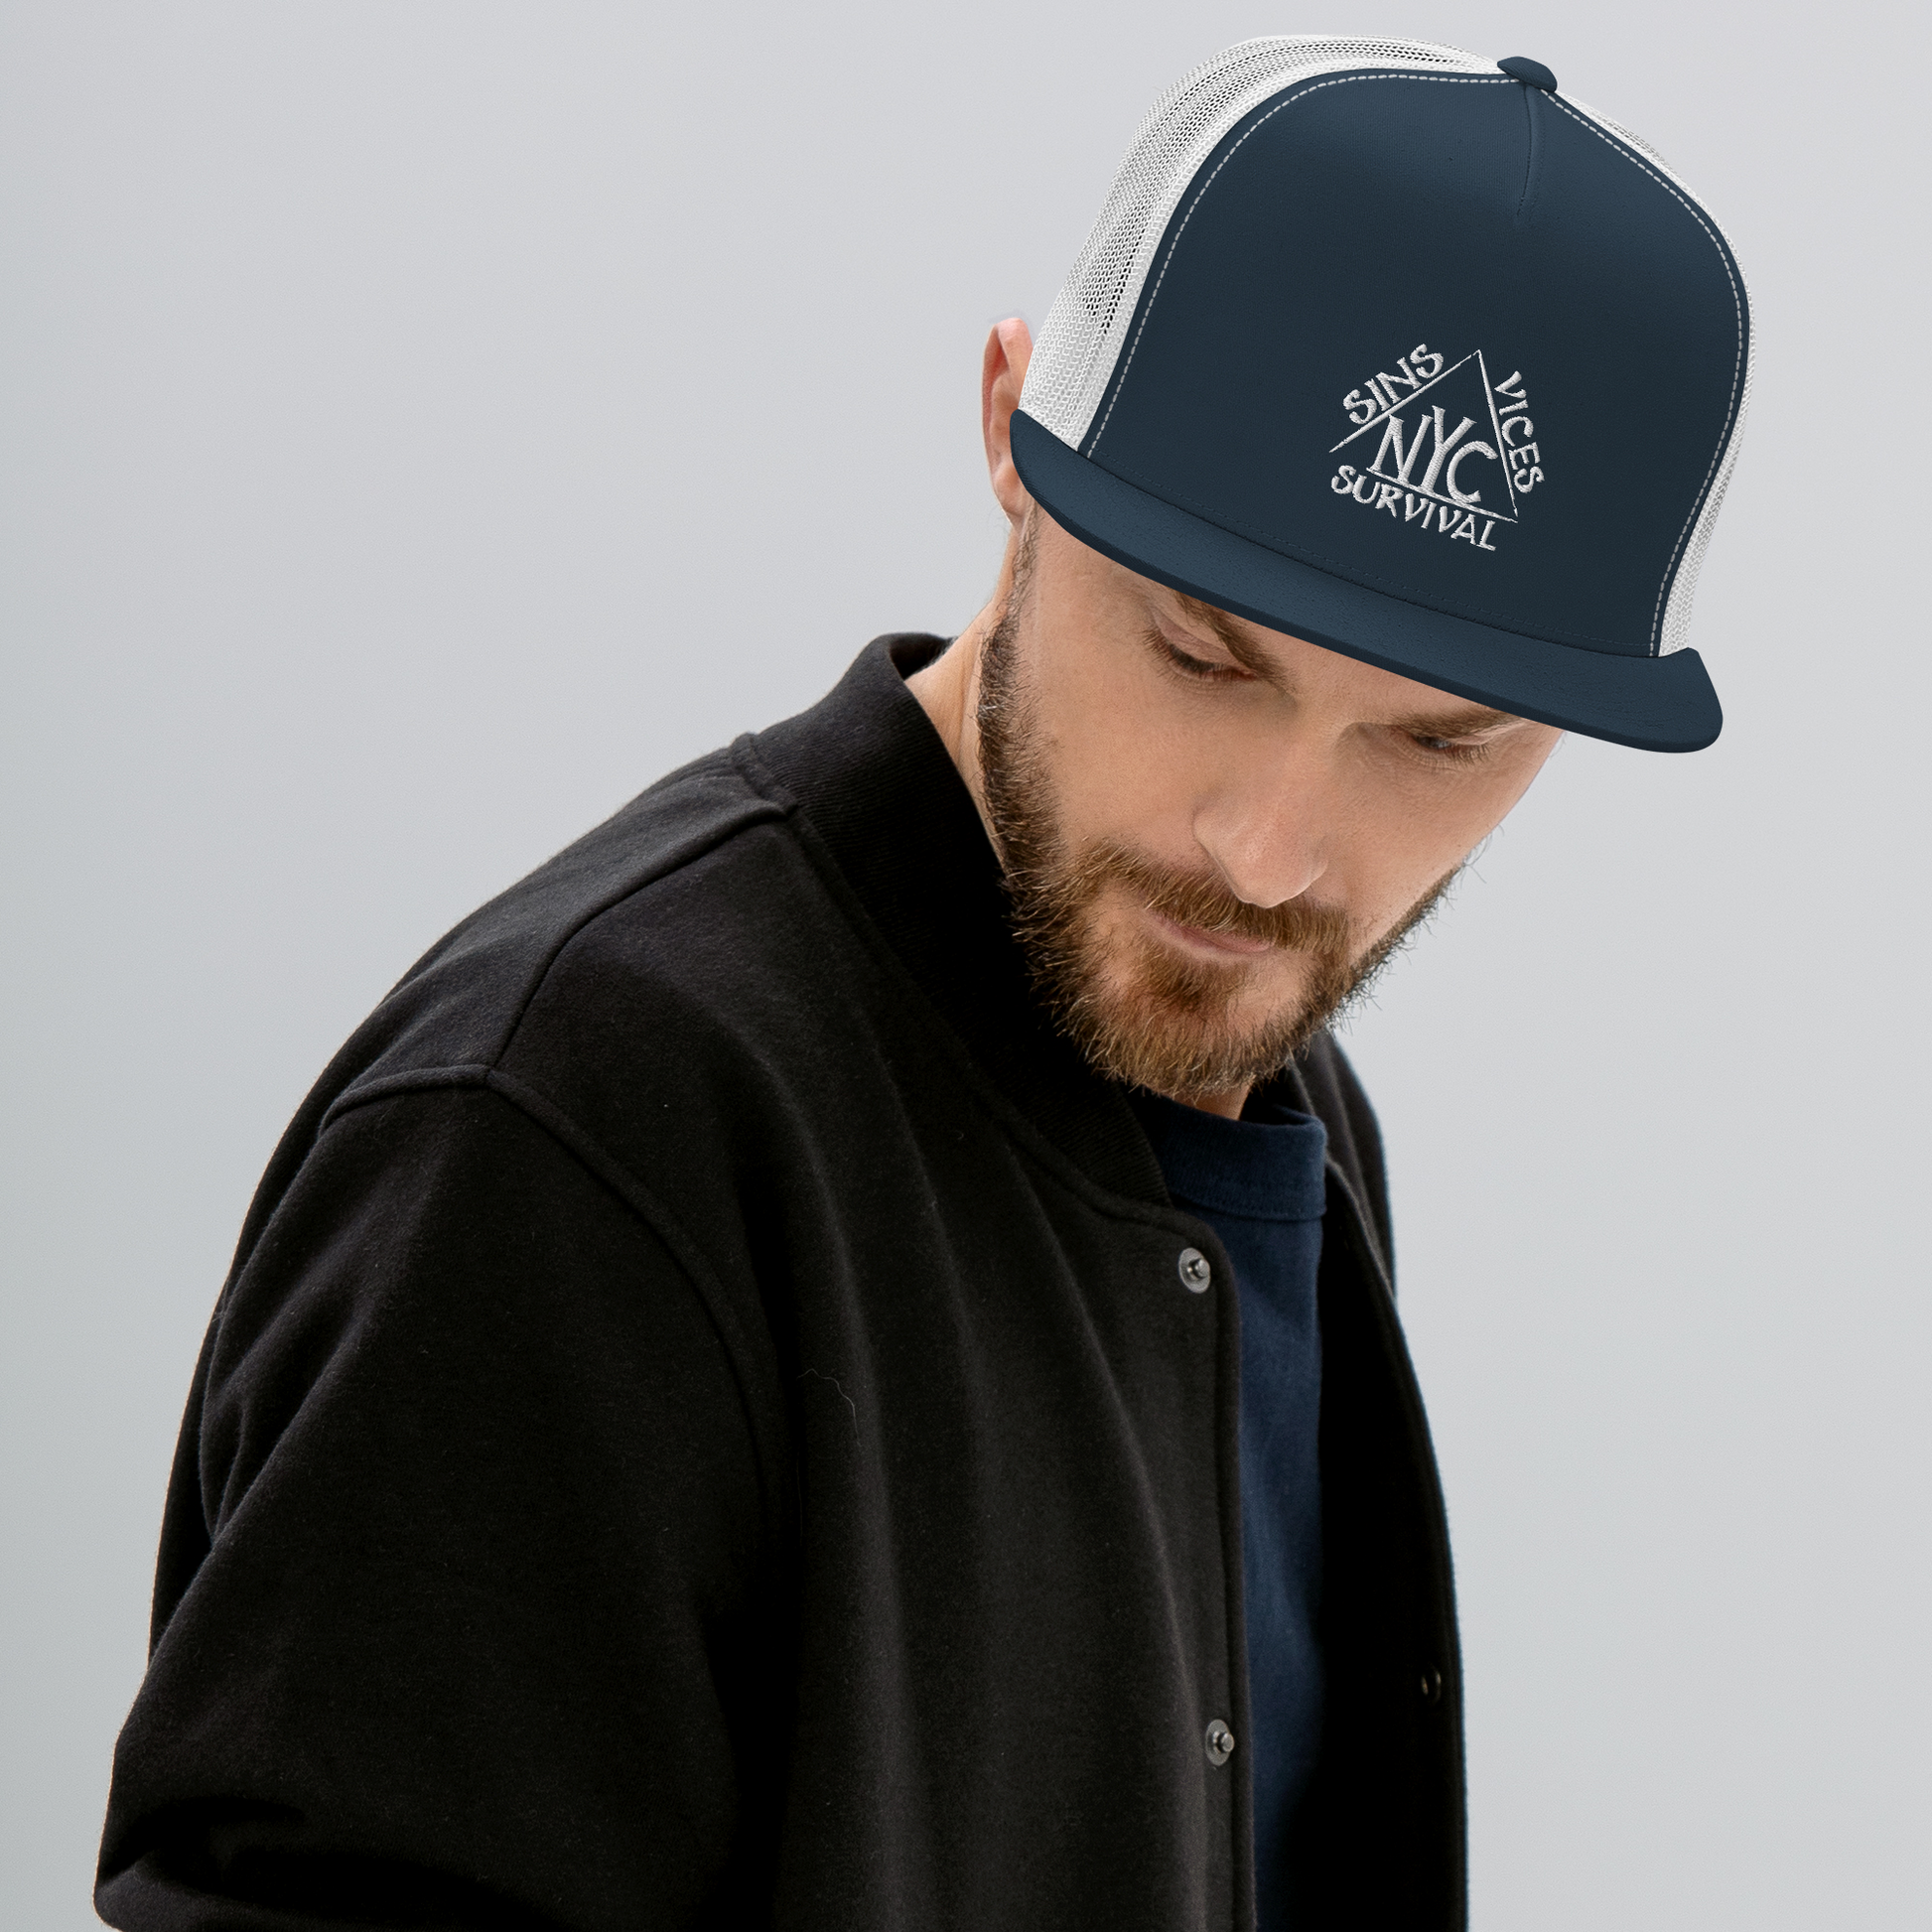 SNV Origins Trucker Cap navy and White Front